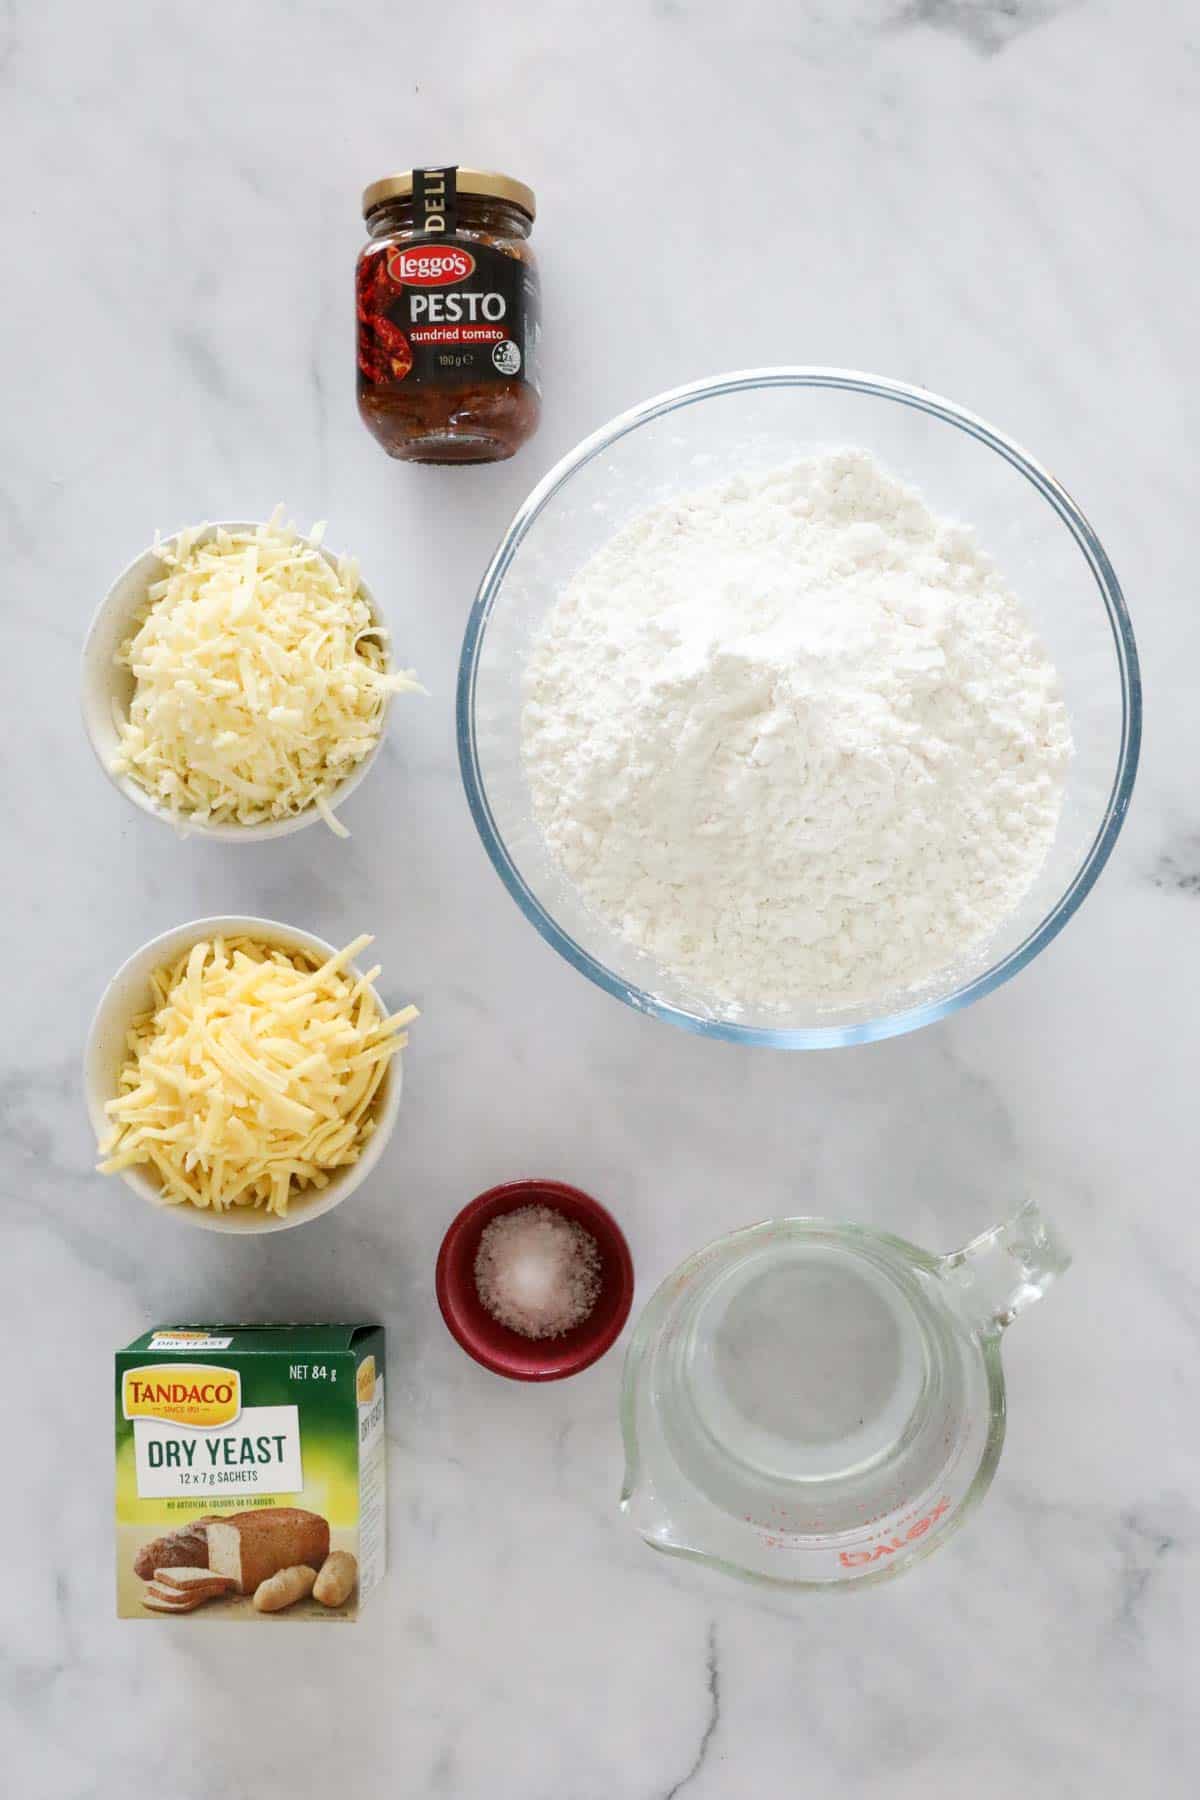 The ingredients for Thermomix Sundried Tomato Pesto & Cheese Pull Apart Bread.